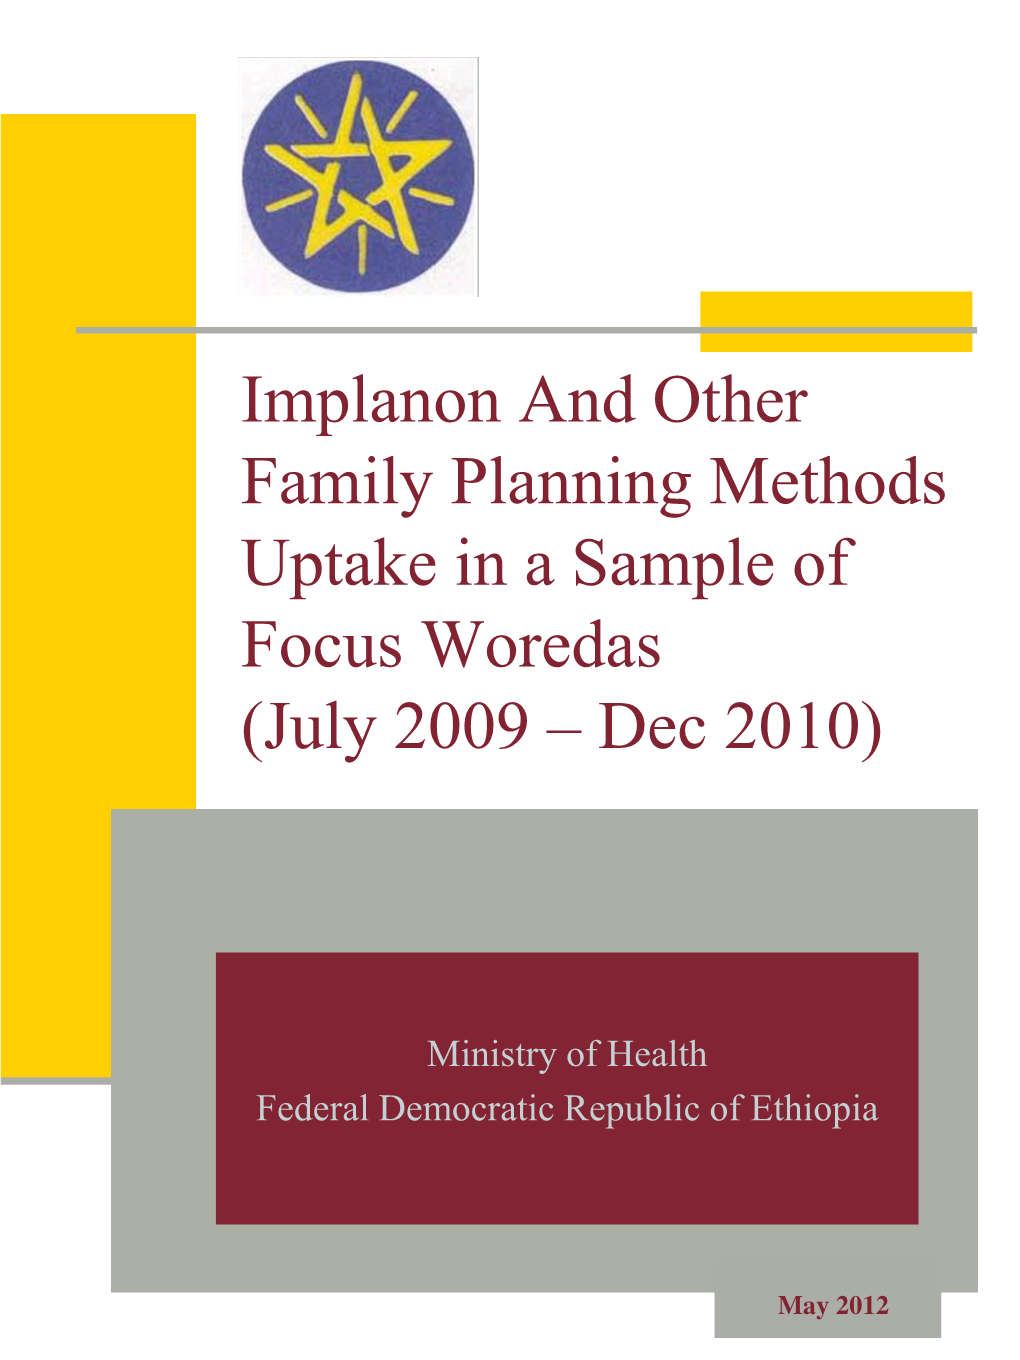 Implanon and Other Family Planning Methods Uptake in a Sample of Focus Woredas (July 2009 – Dec 2010)